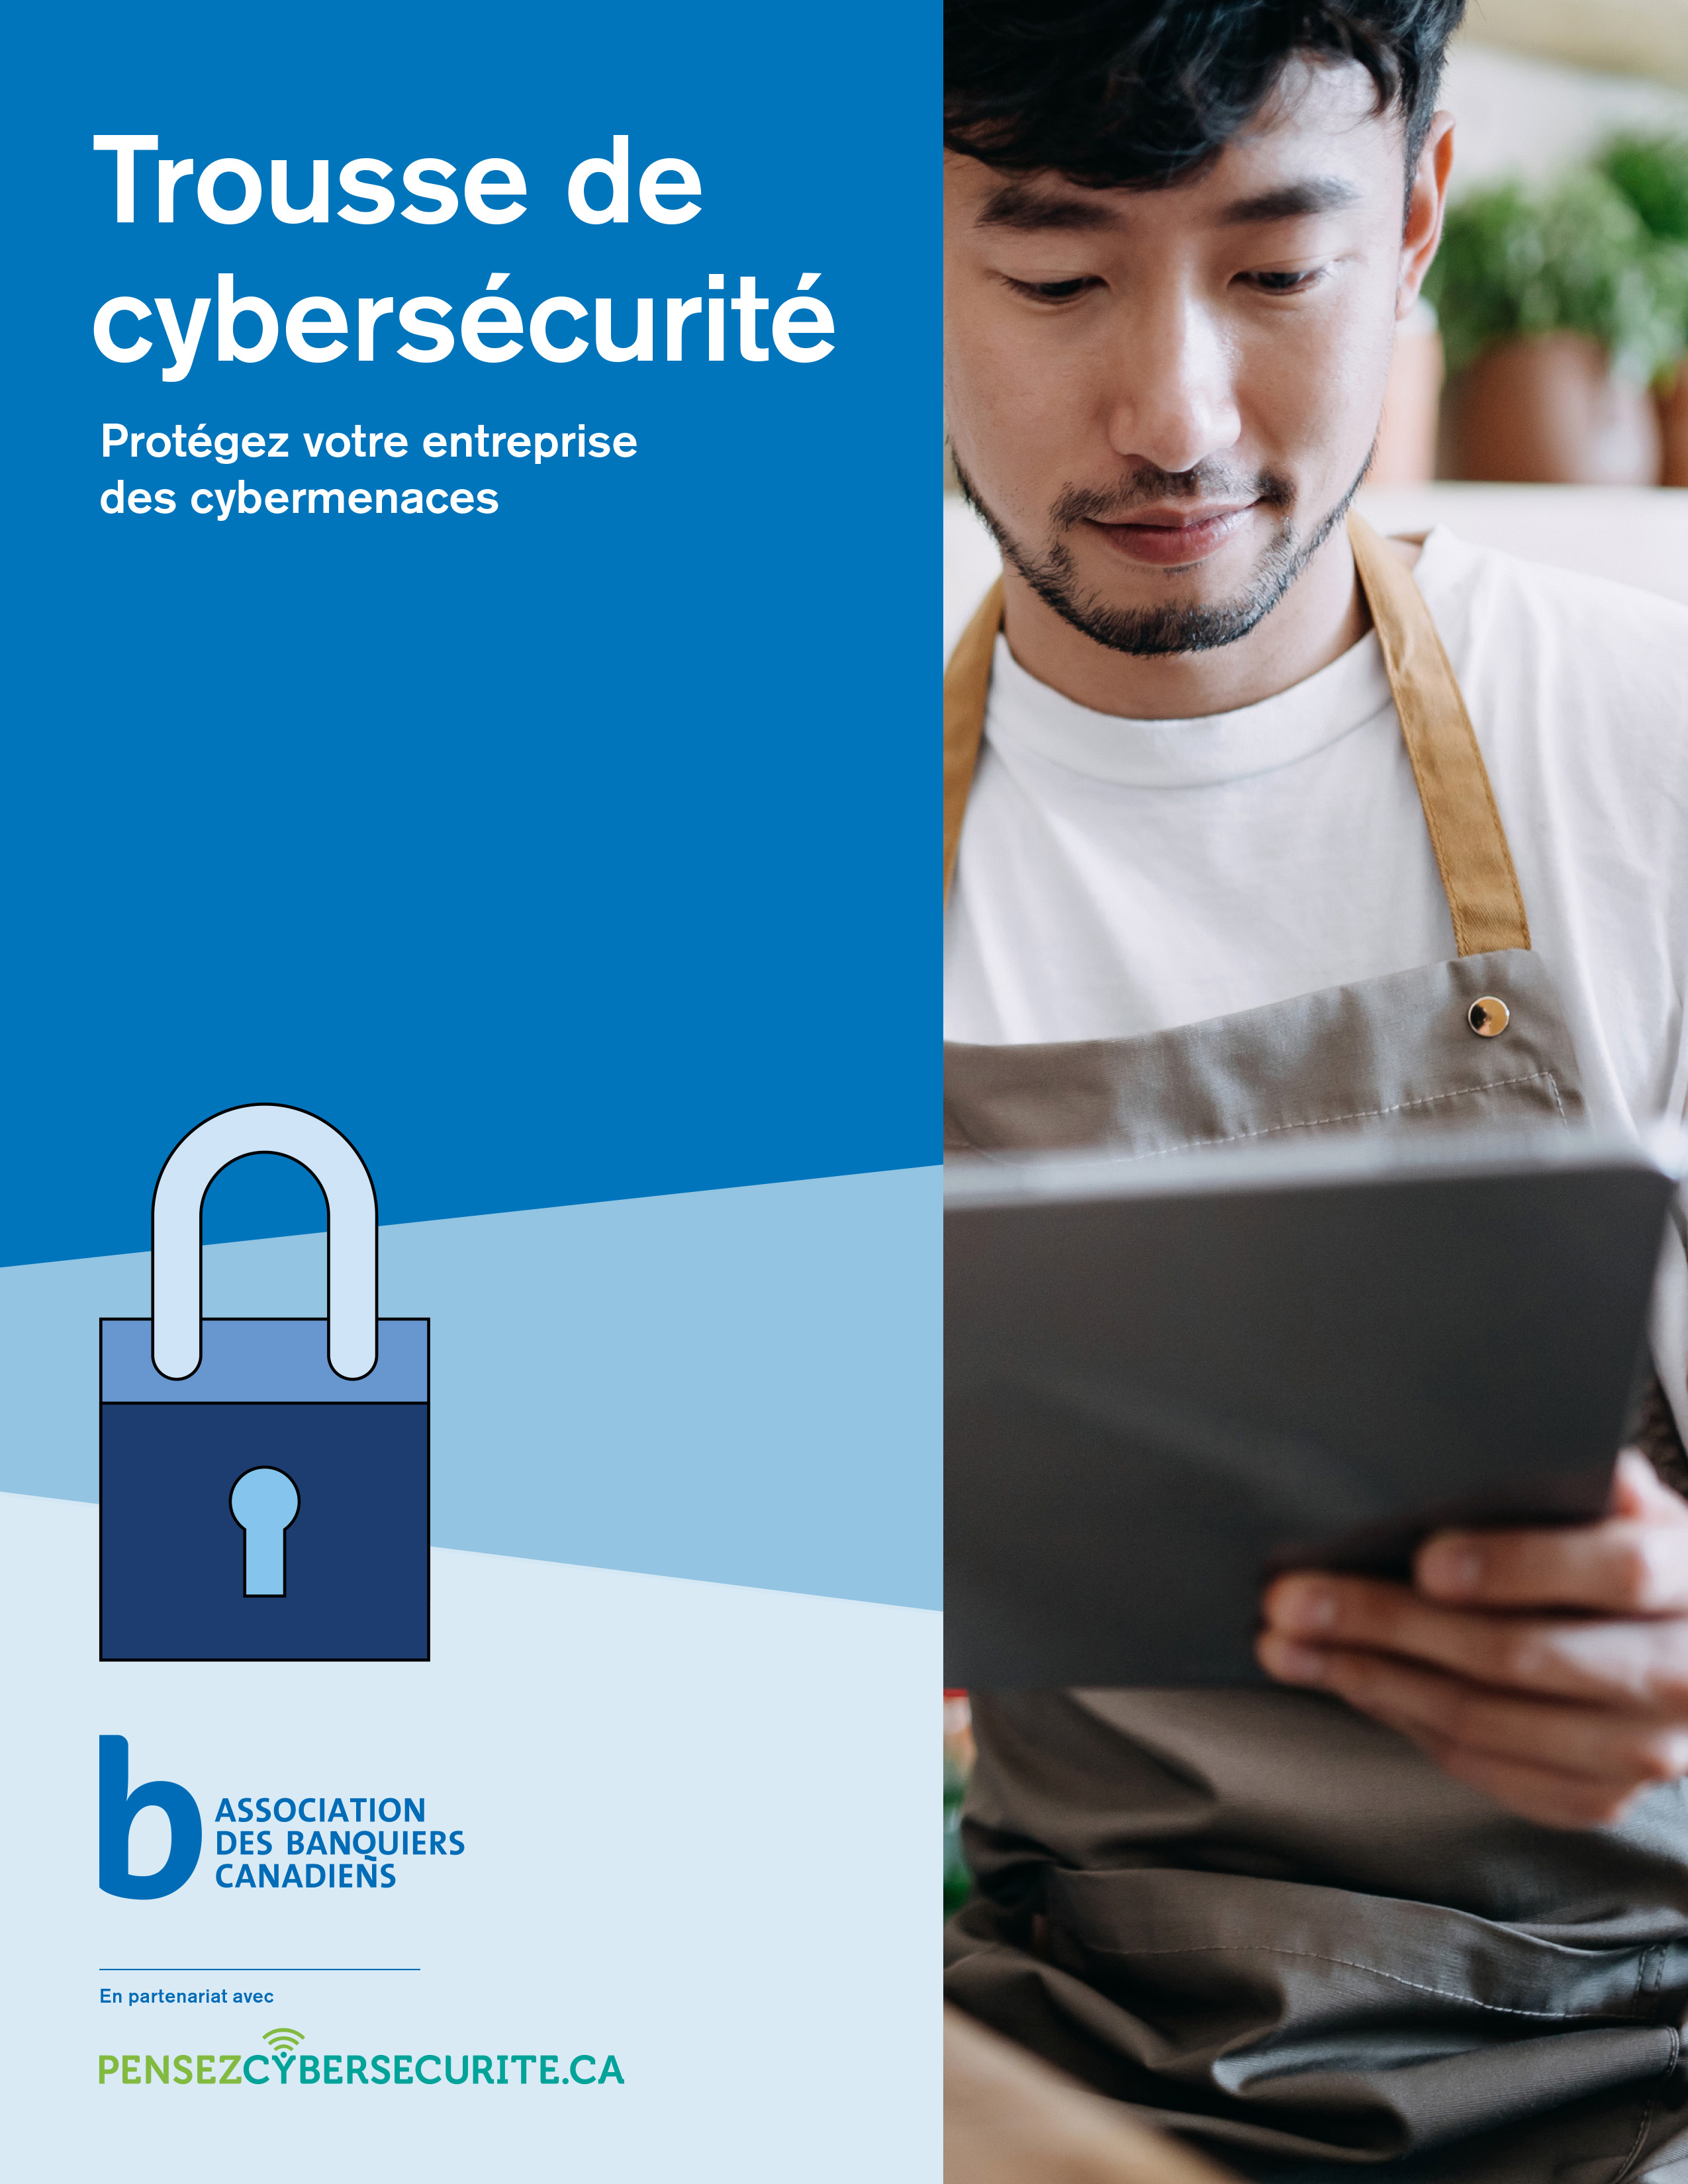 cover of cyber security toolkit